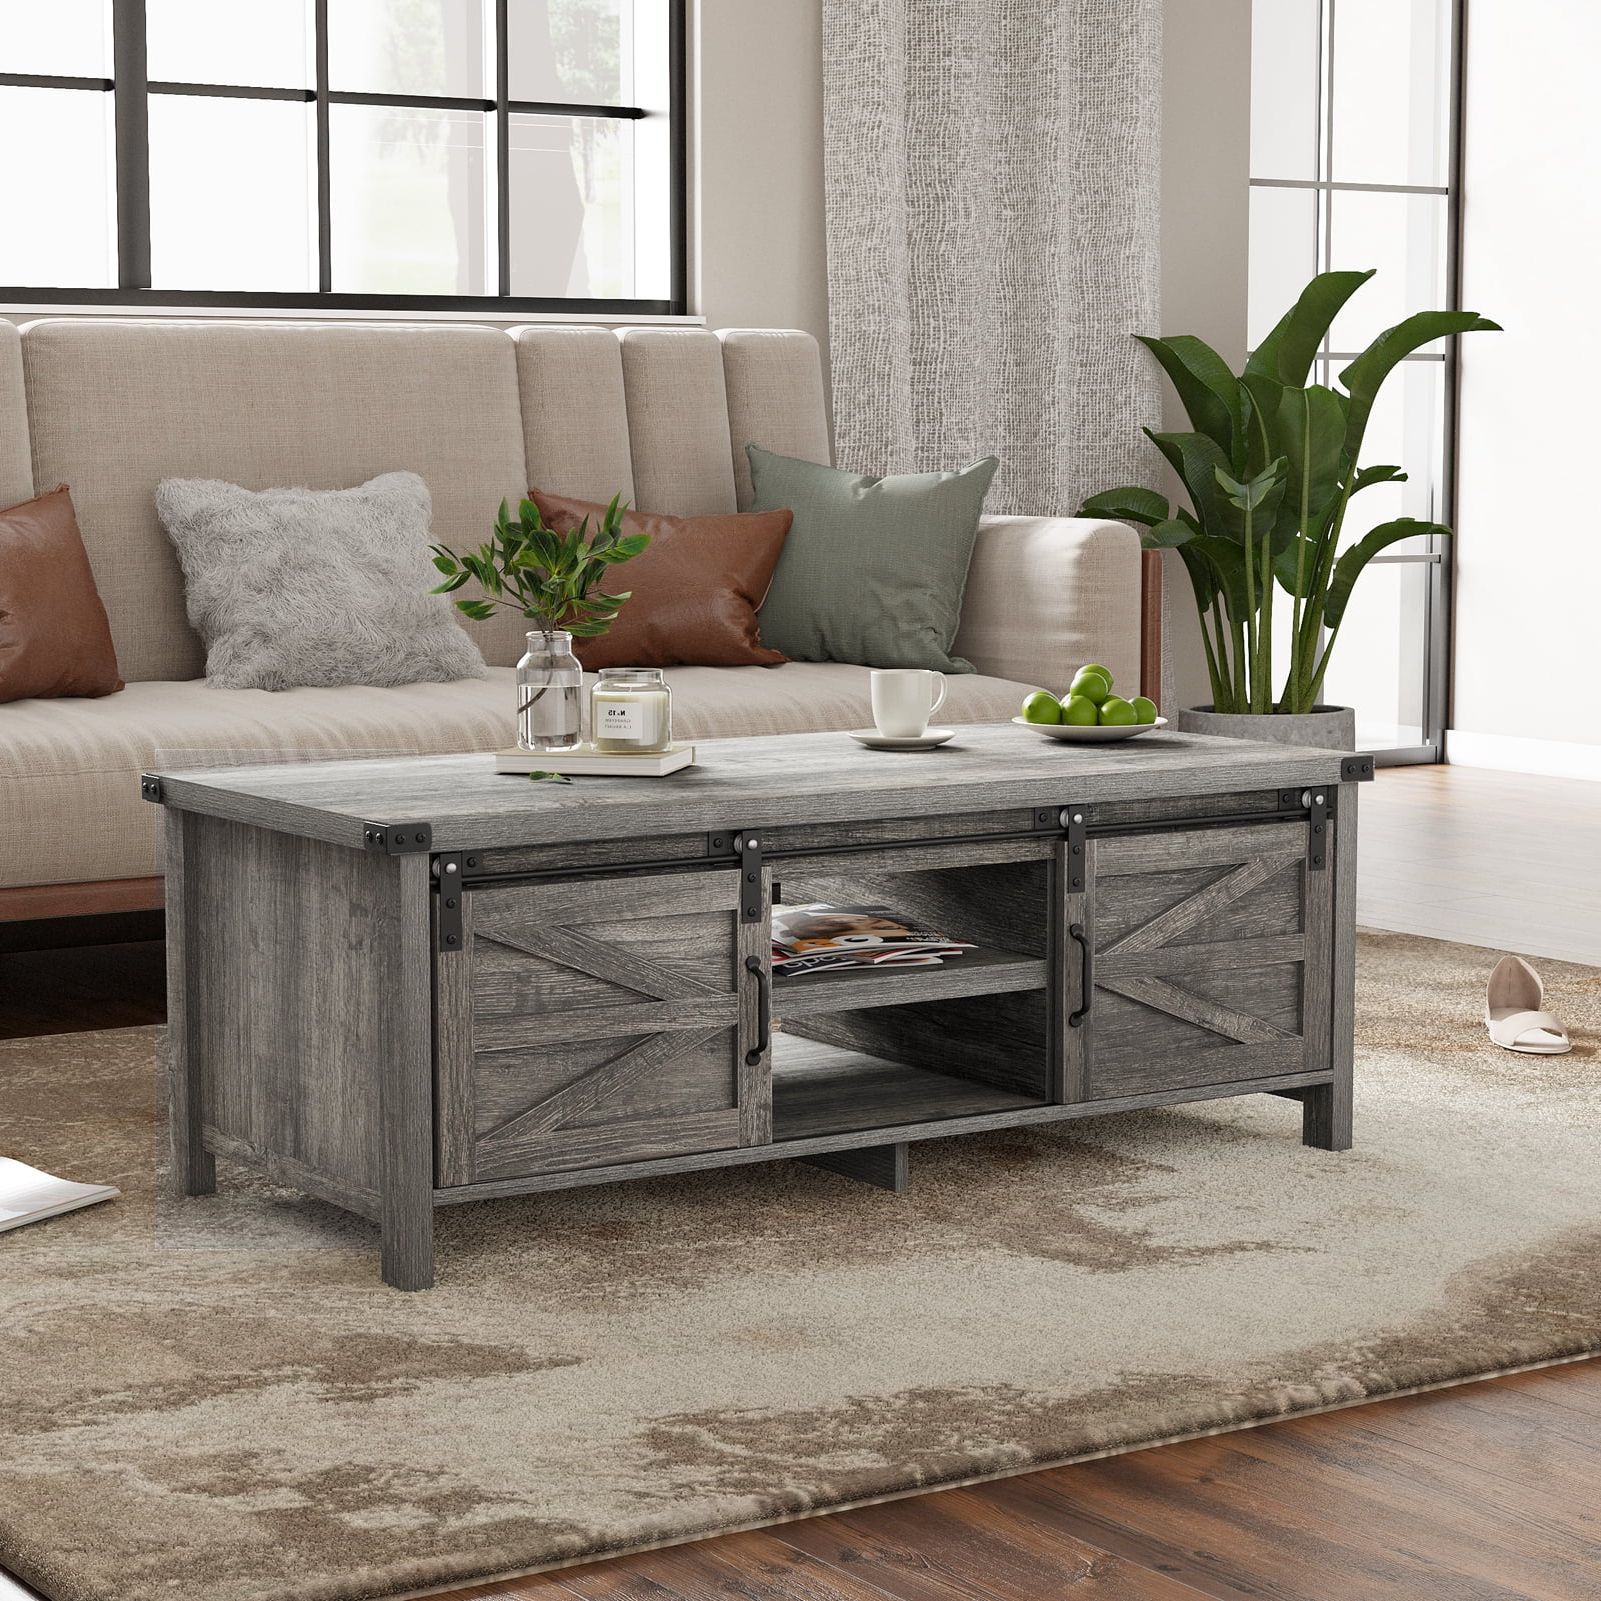 Widely Used Yaoping 48" Modern Farmhouse Coffee Table With Adjustable Storage Cabinets  Shelves, Modern Coffee Table For Living Room With Sliding Barn Door –  Walmart In Coffee Tables With Sliding Barn Doors (View 10 of 10)